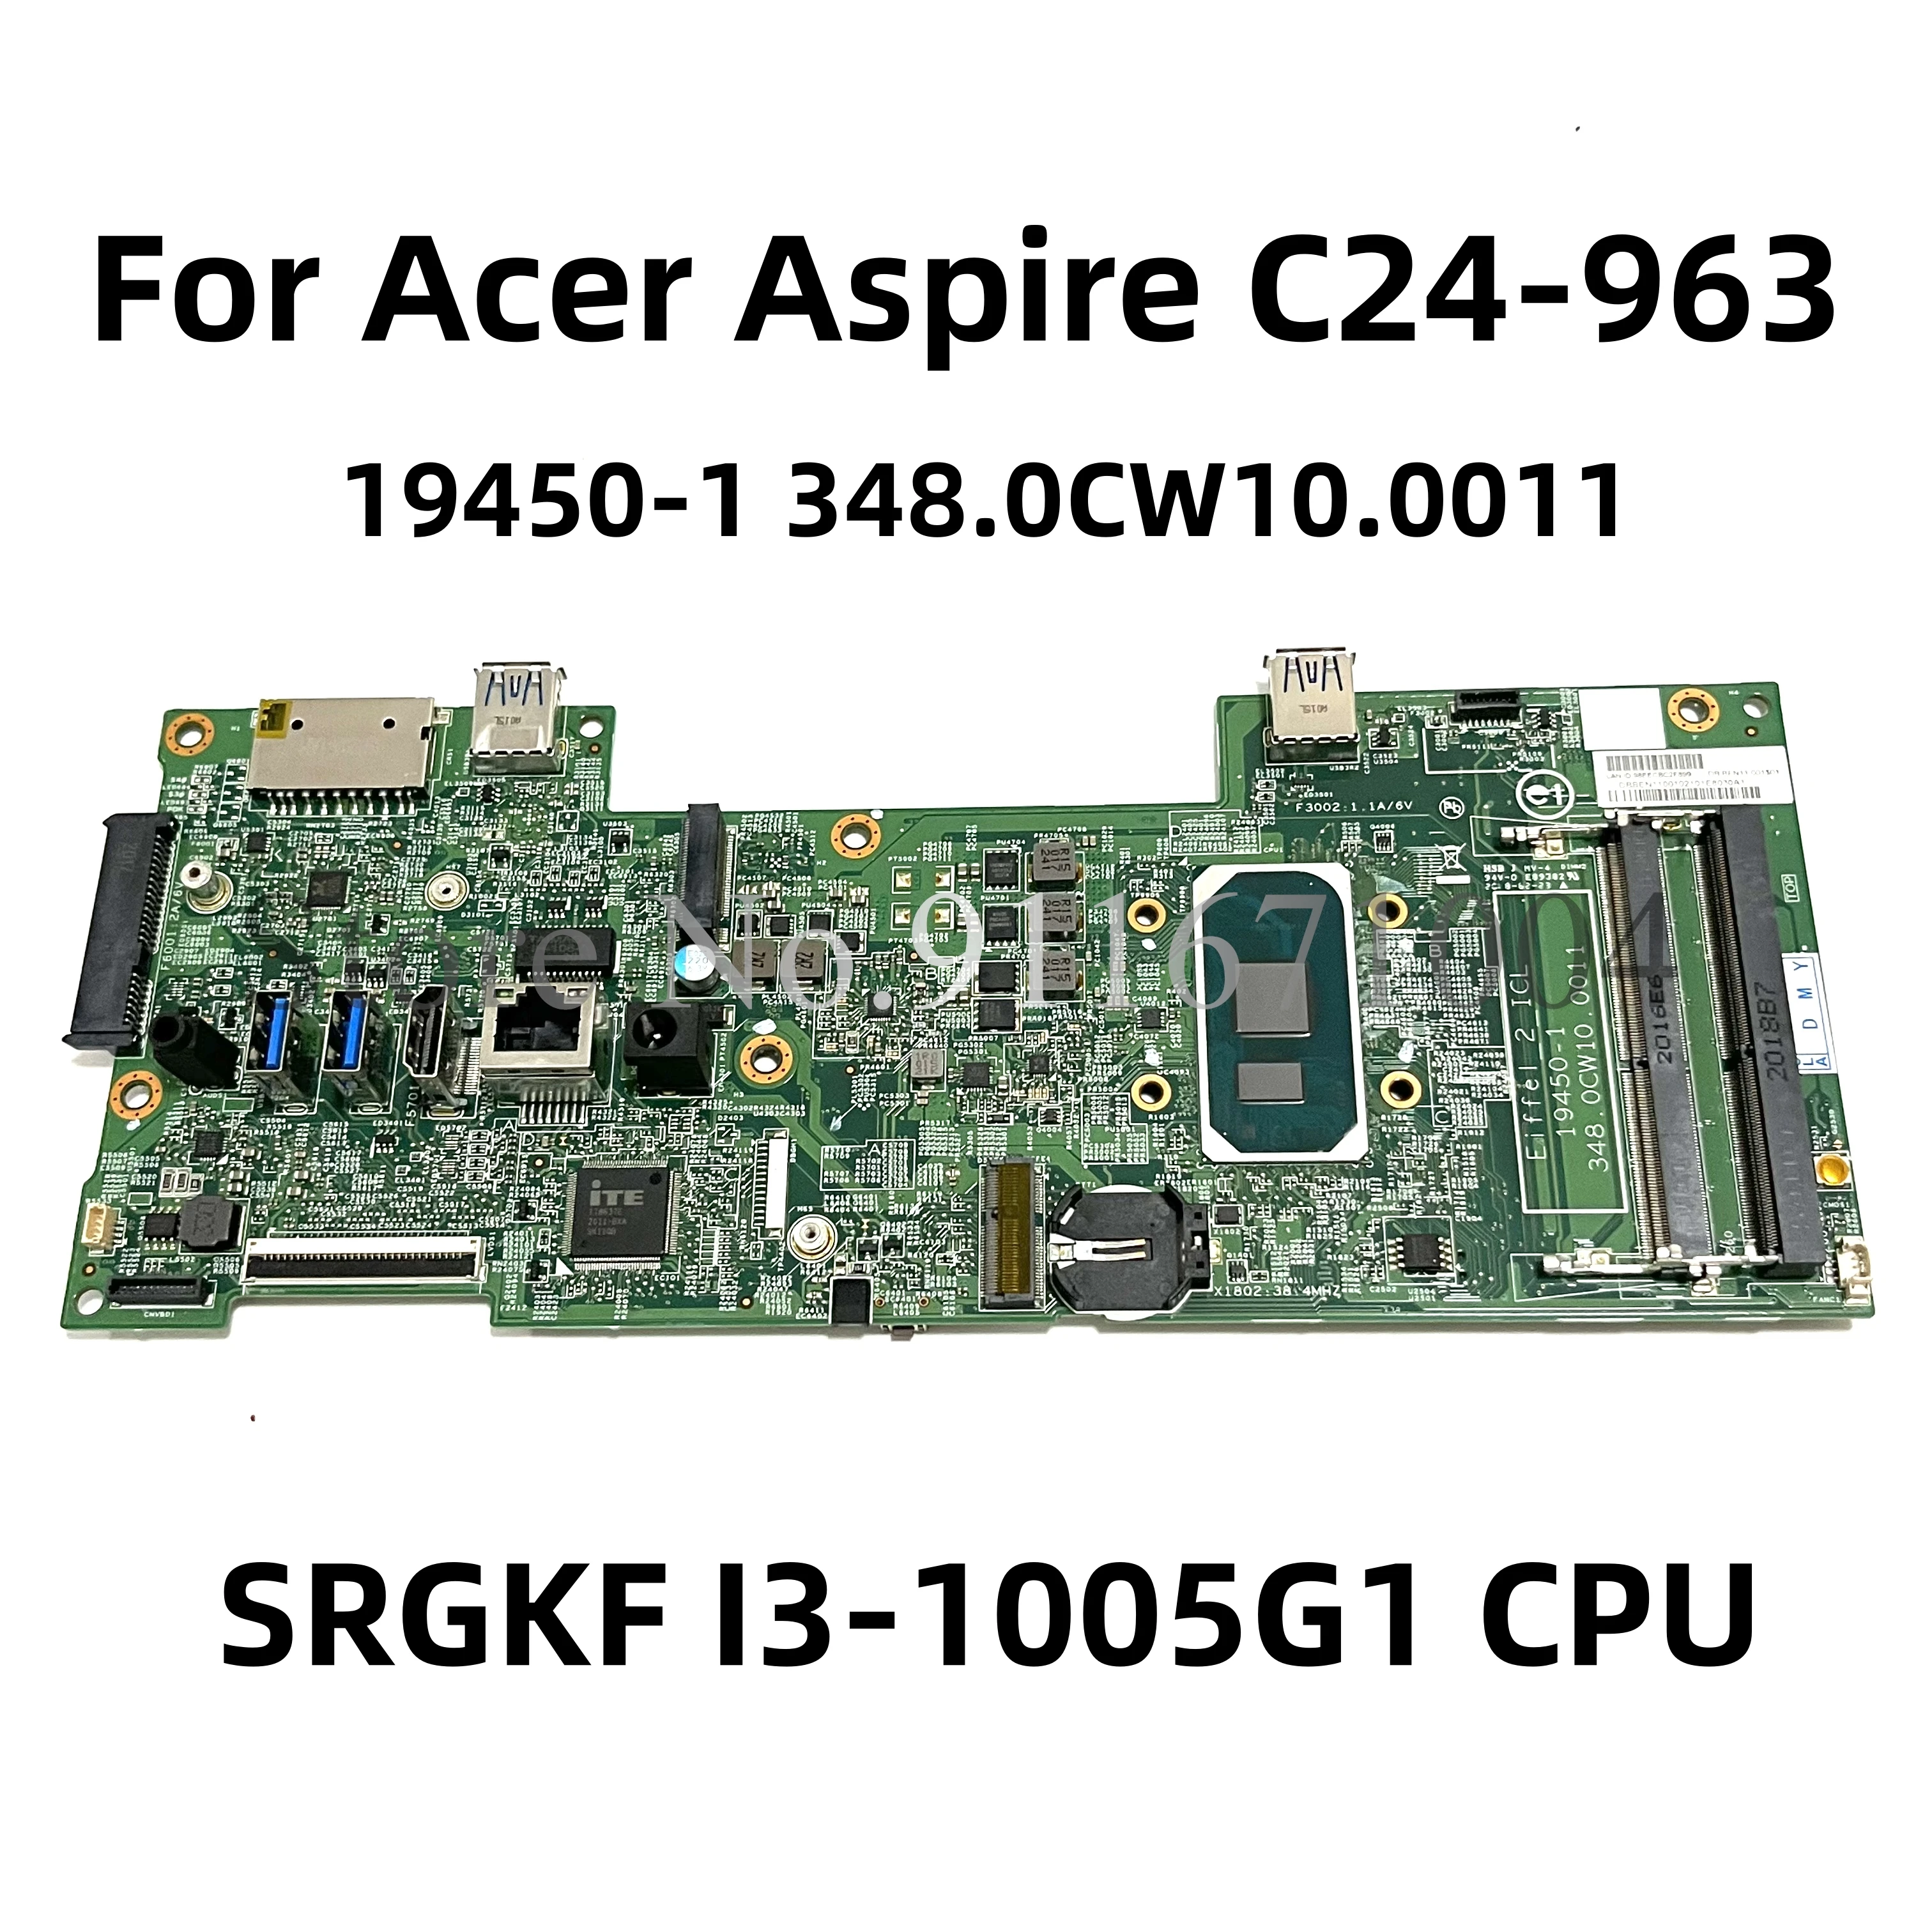 

19450-1 DB.BEN11.001 For Acer Aspire C24-963 All-in-One Motherboard 348.0CW10.0011 With SRGKF I3-1005G1 CPU Mainboard 100% Test